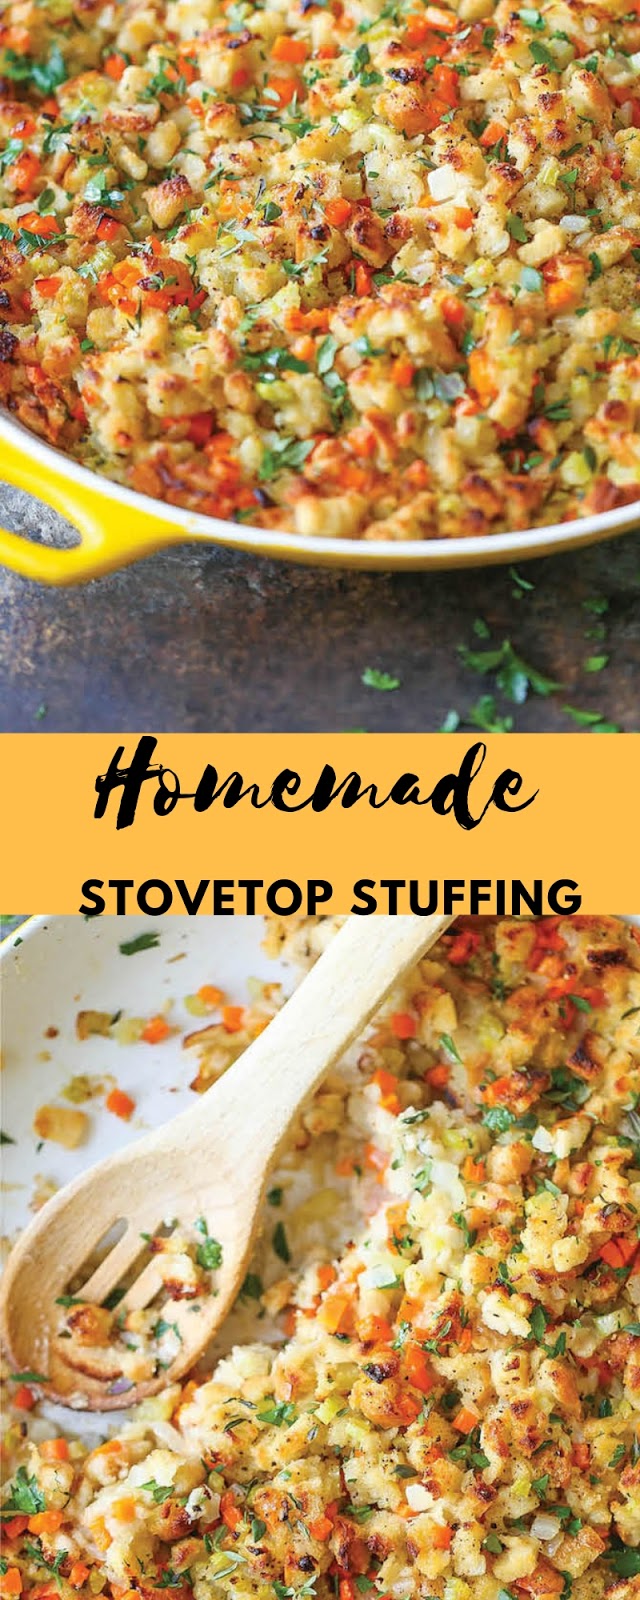 Homemade Stovetop Stuffing